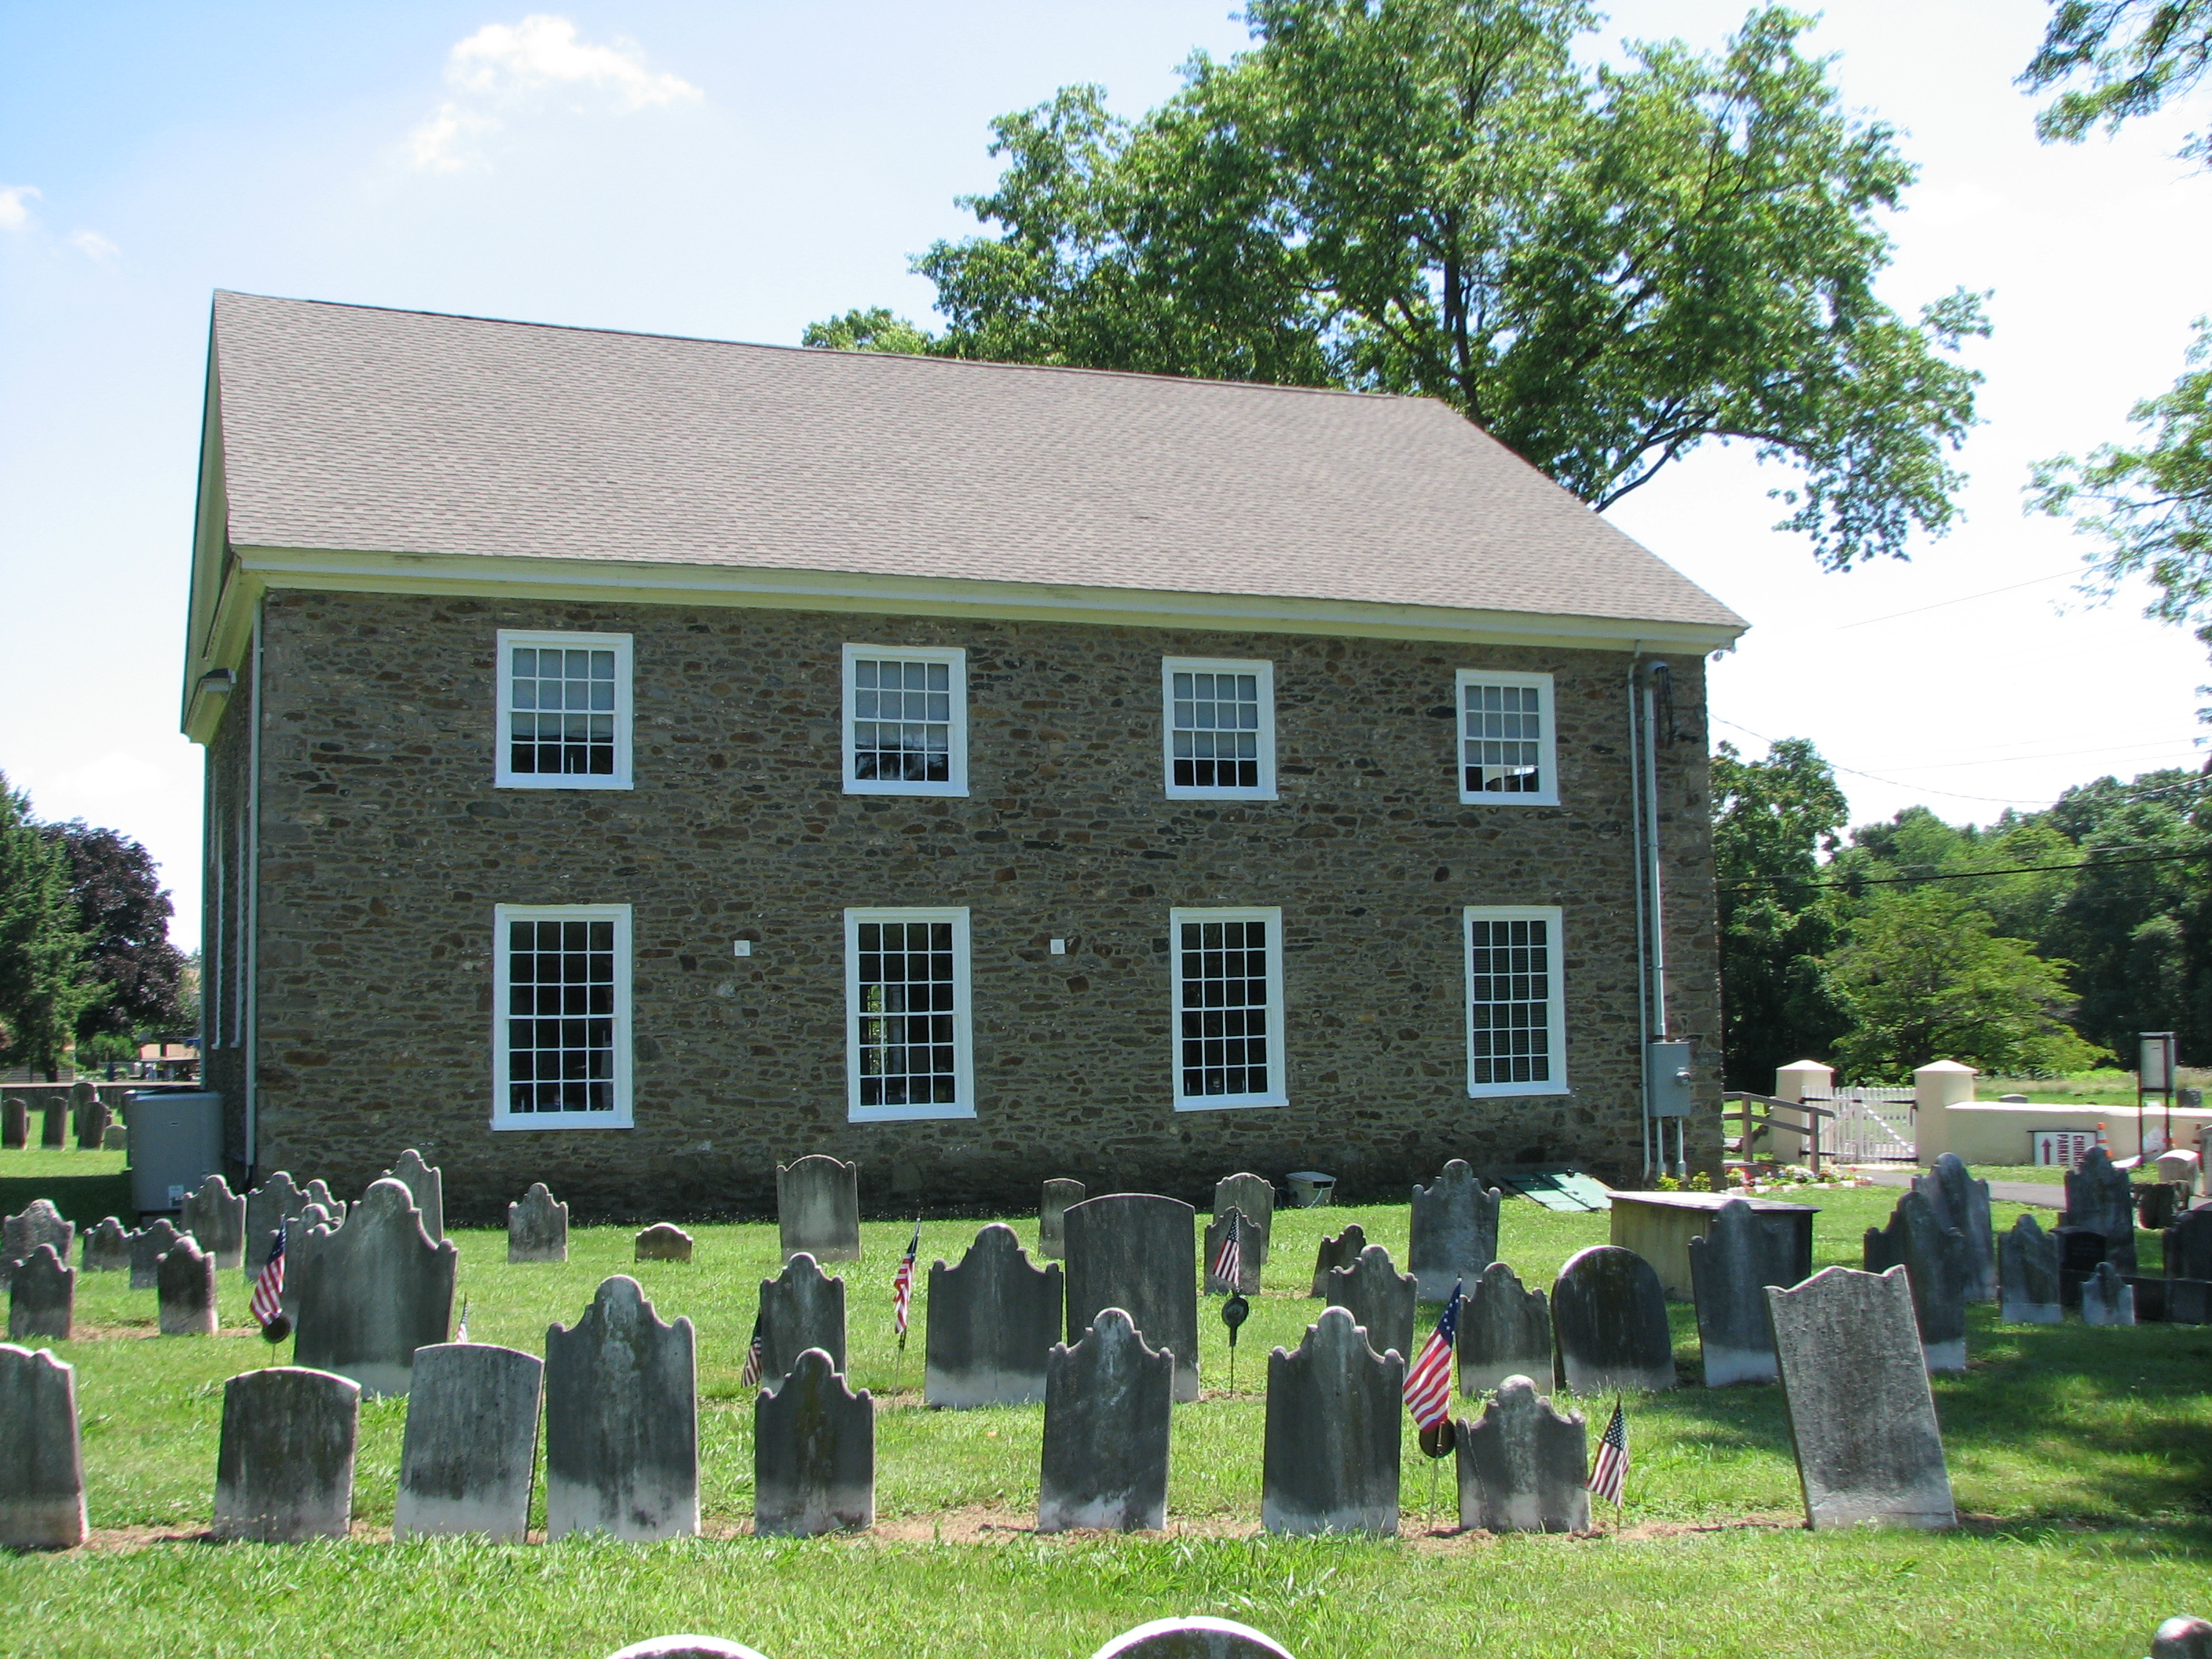 The southern side of Pennepack Baptist Church and cemetery.